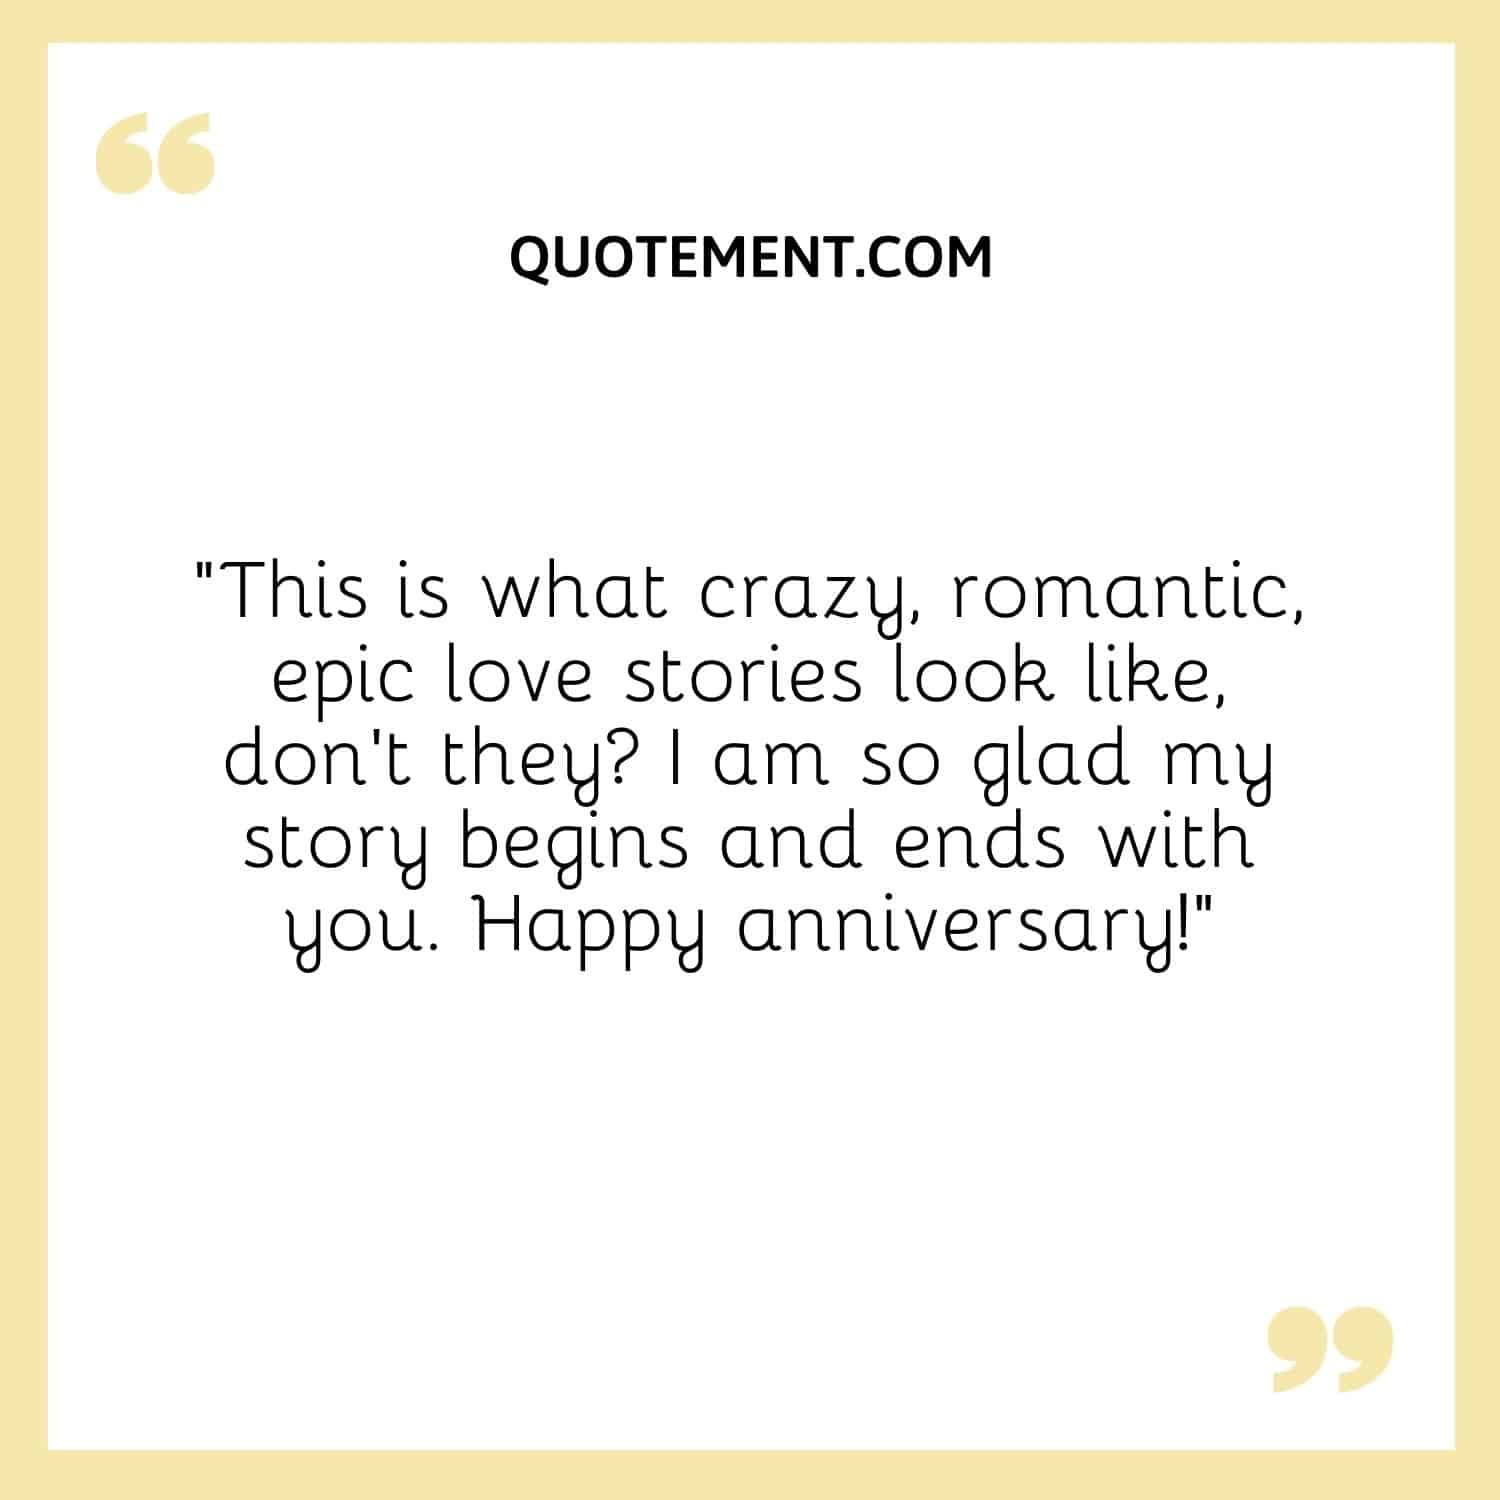 “This is what crazy, romantic, epic love stories look like, don’t they I am so glad my story begins and ends with you. Happy anniversary!”